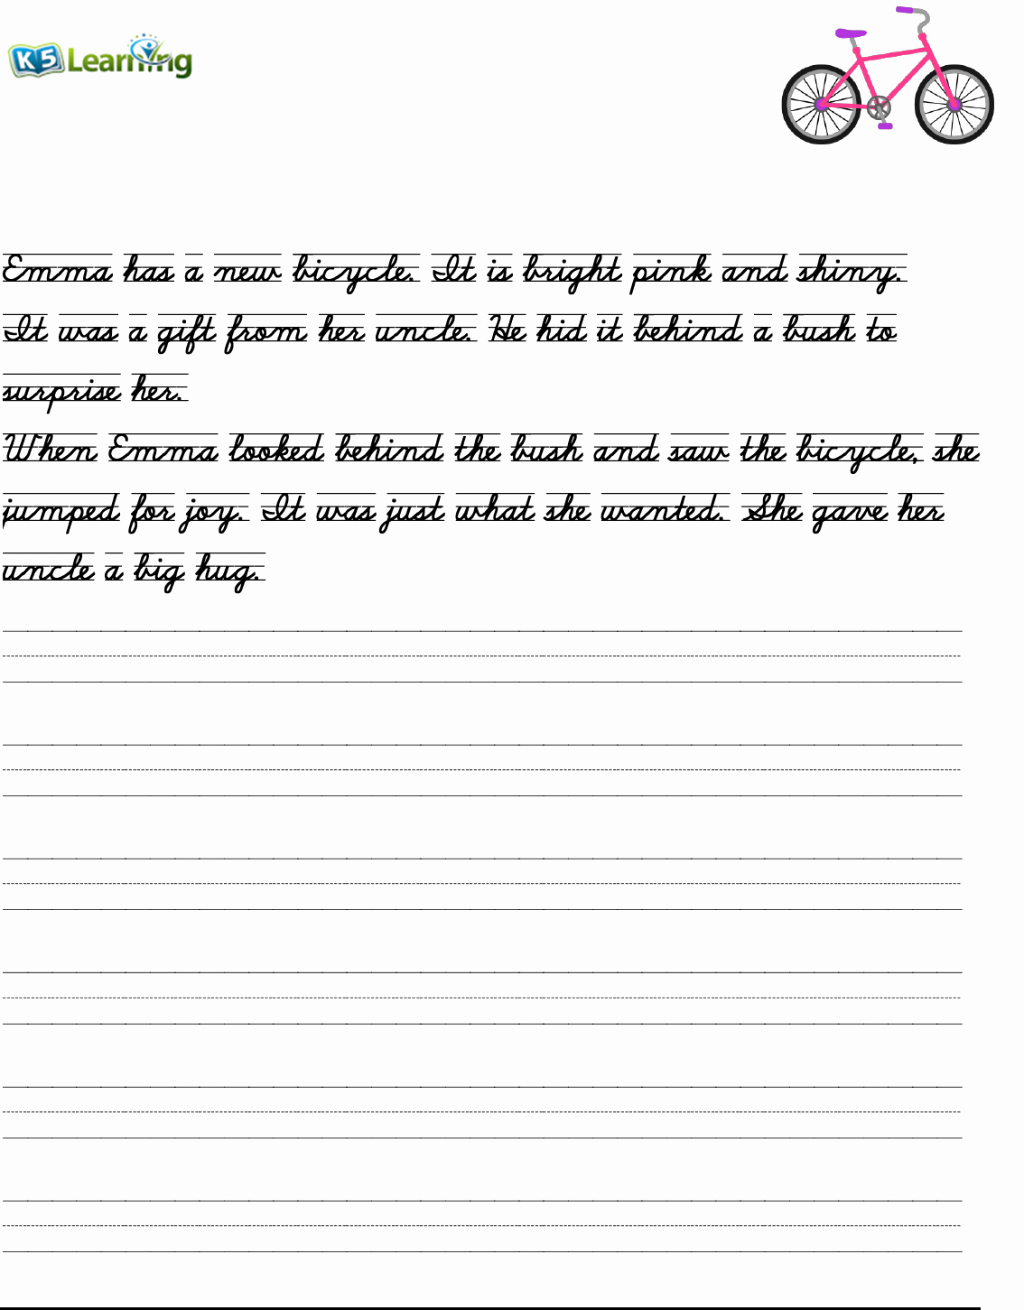 Free Paragraph Writing Worksheets Unique Cursive Handwriting Practice Paragraph Worksheets Pdf